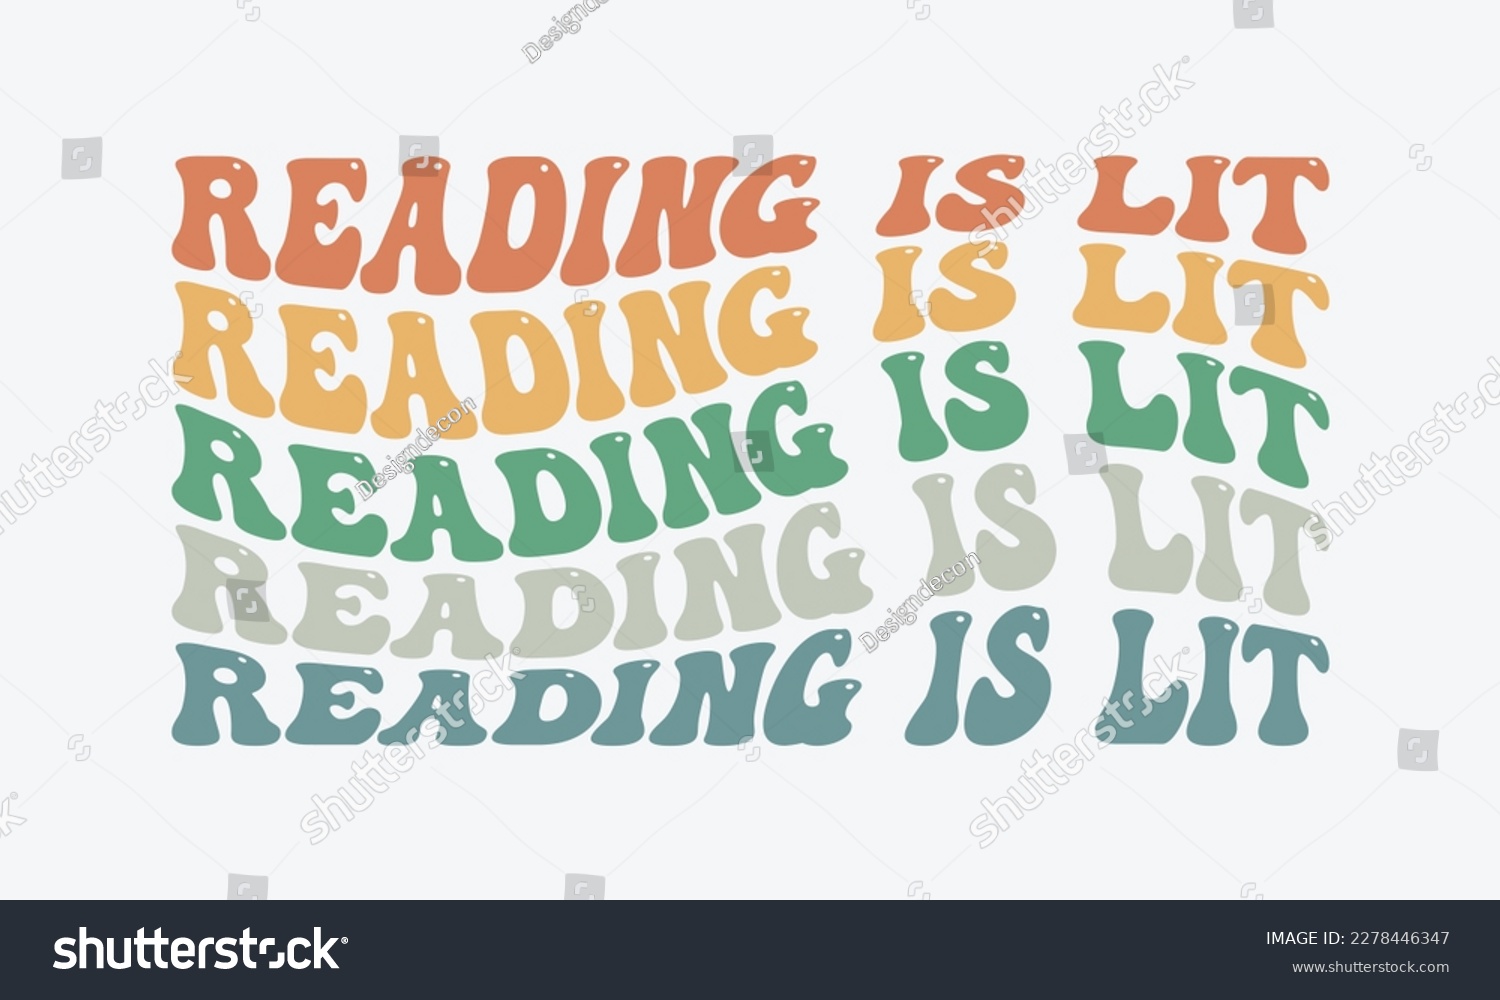 SVG of Reading is lit quote retro wavy repeat text colorful 3D typographic art on a white background svg